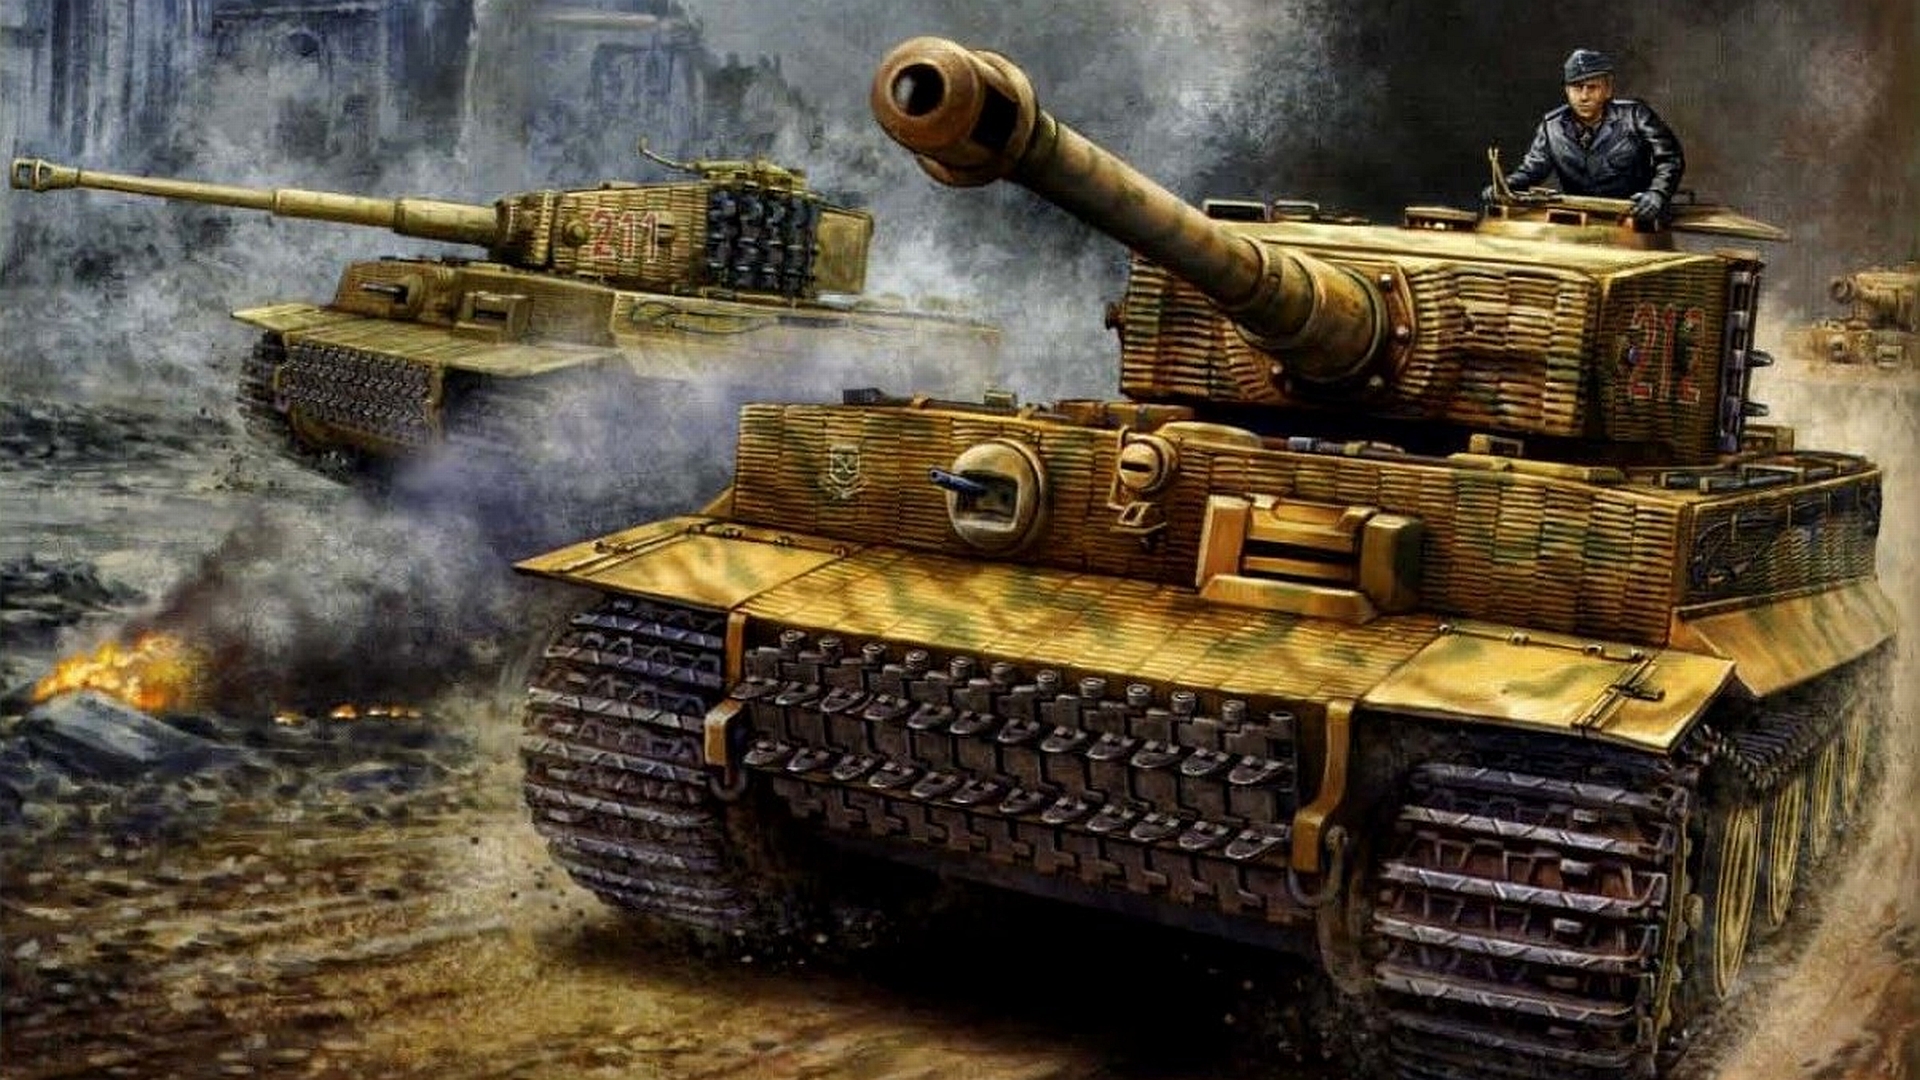 Download background military, tank, tanks